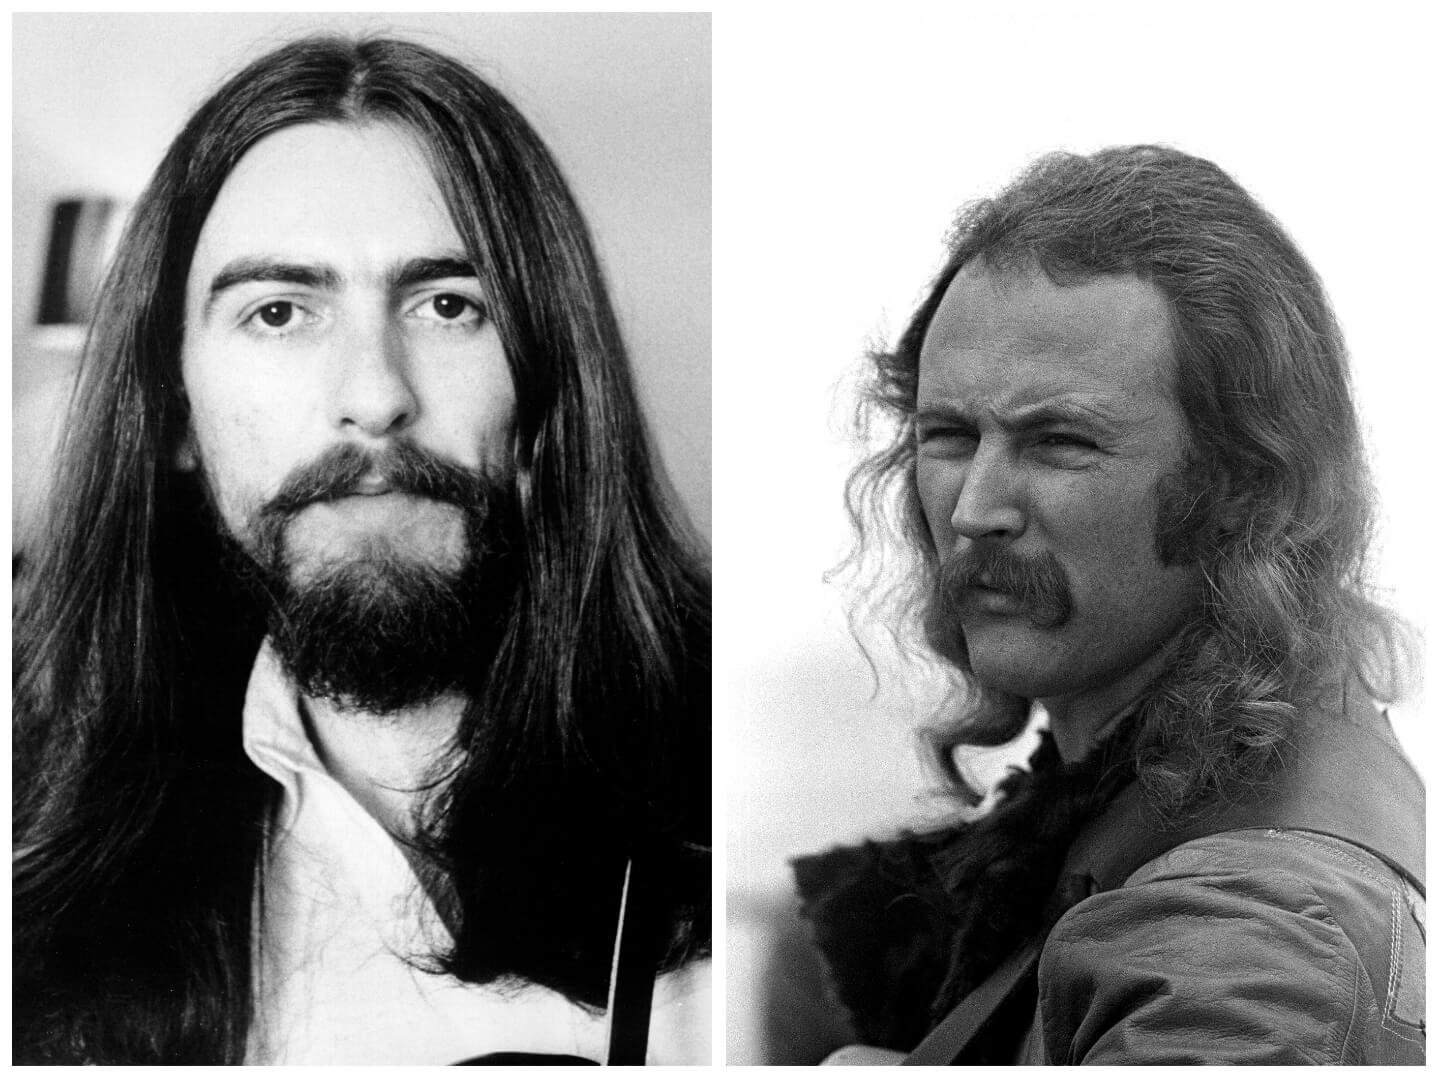 A black and white picture of George Harrison with long hair. David Crosby turns to face the camera.